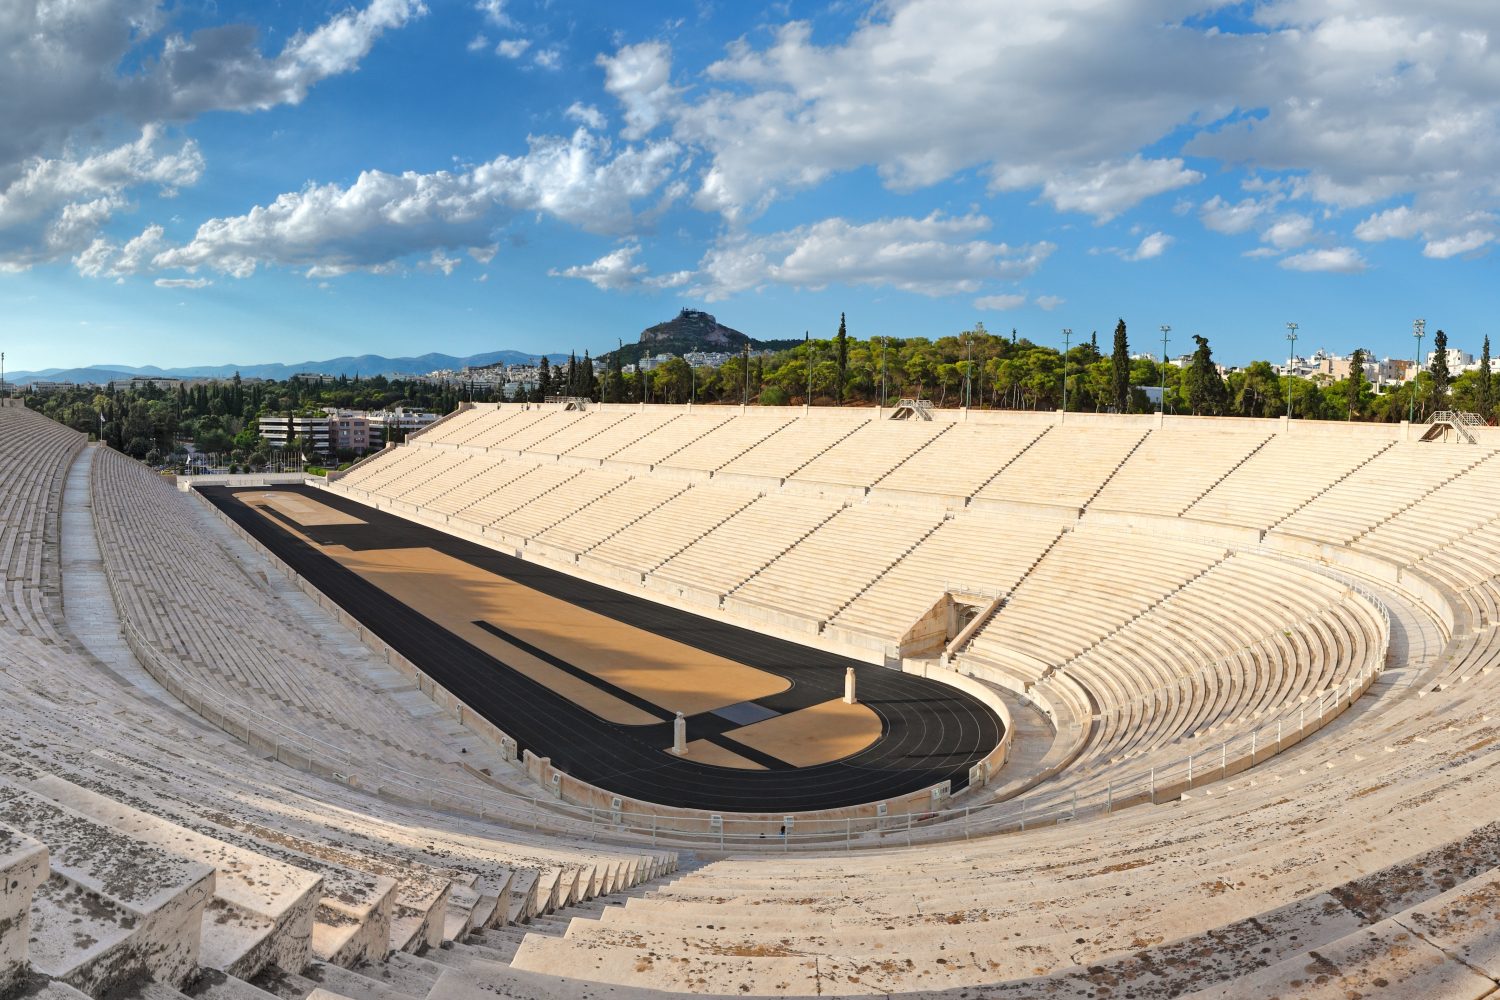 Panathenaic Stadium (329 B.C.) in Athens, hosted the first modern Olympic Games in Greece.